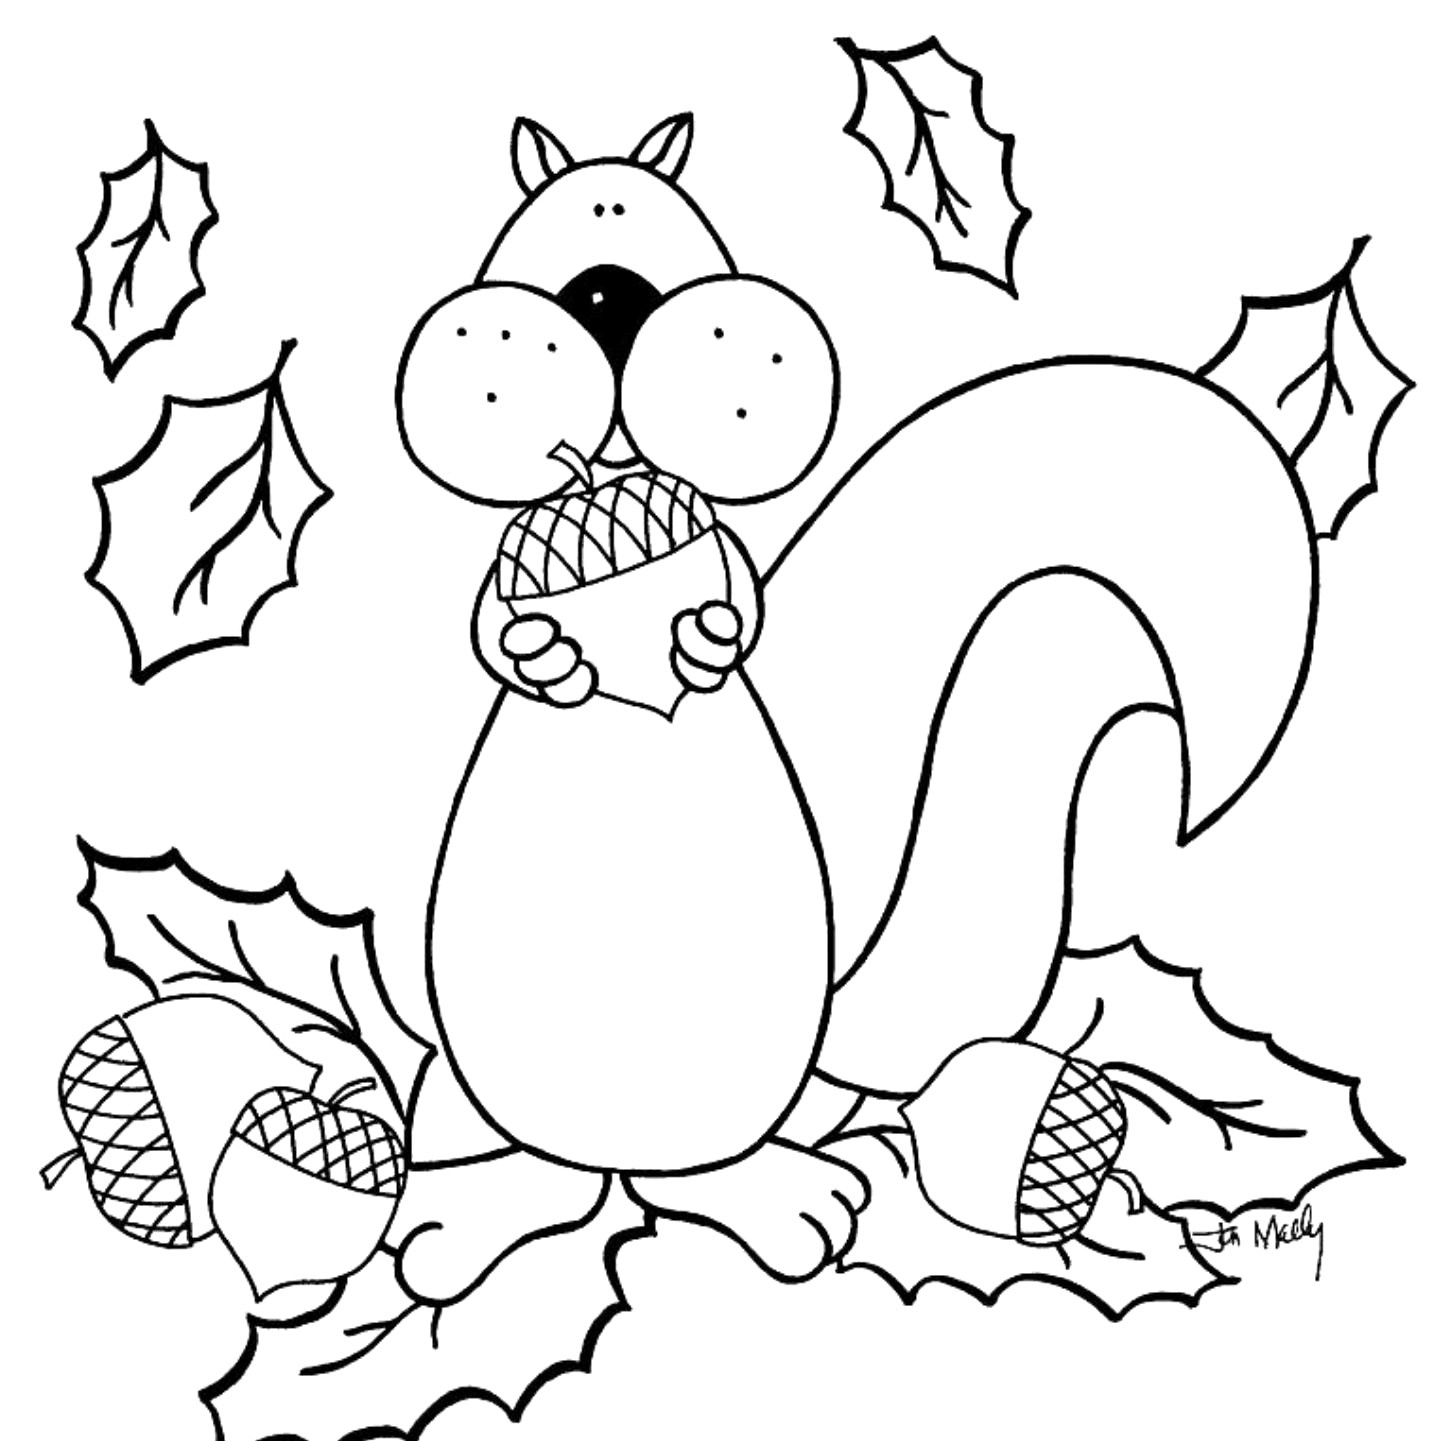 Free Printable Fall Coloring Pages For Kids - Best Coloring Pages - Free Printable Autumn Coloring Sheets